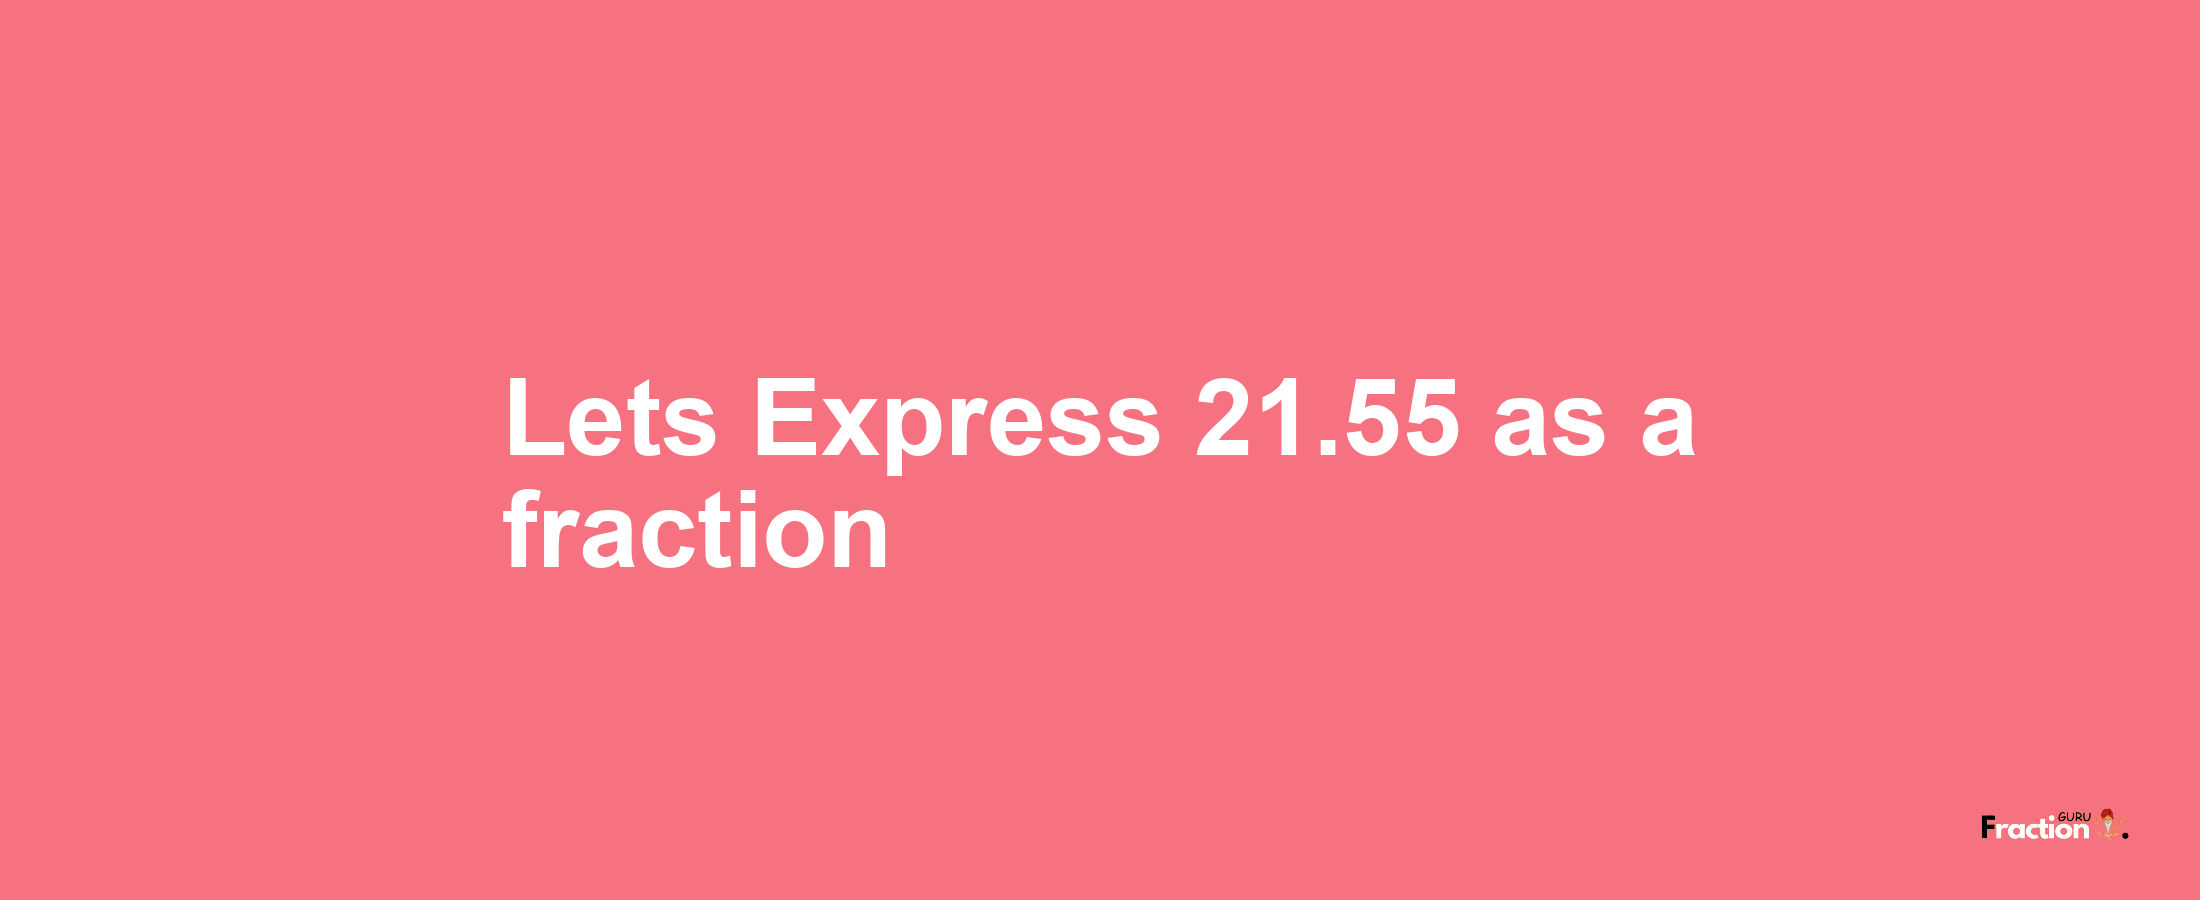 Lets Express 21.55 as afraction